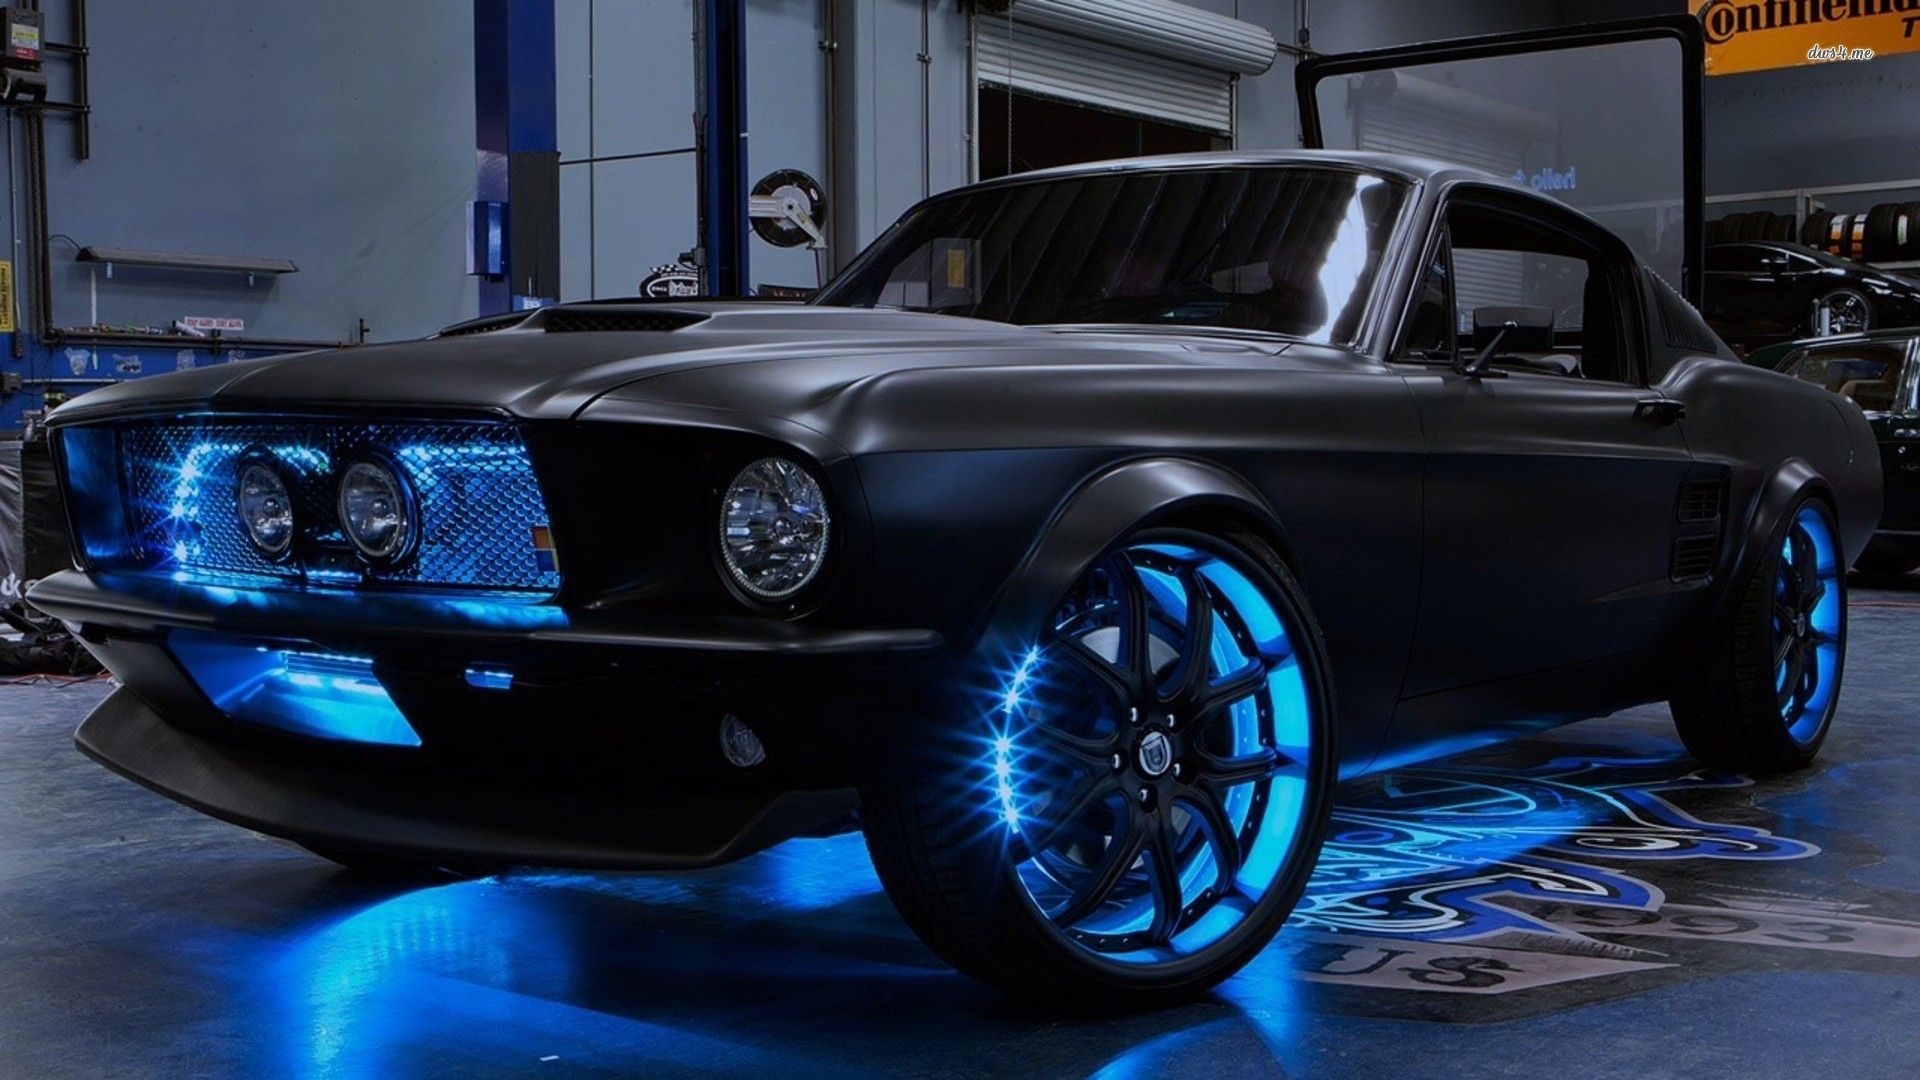 West Coast Customs Ford Mustang wallpaper - Car wallpapers - #16087